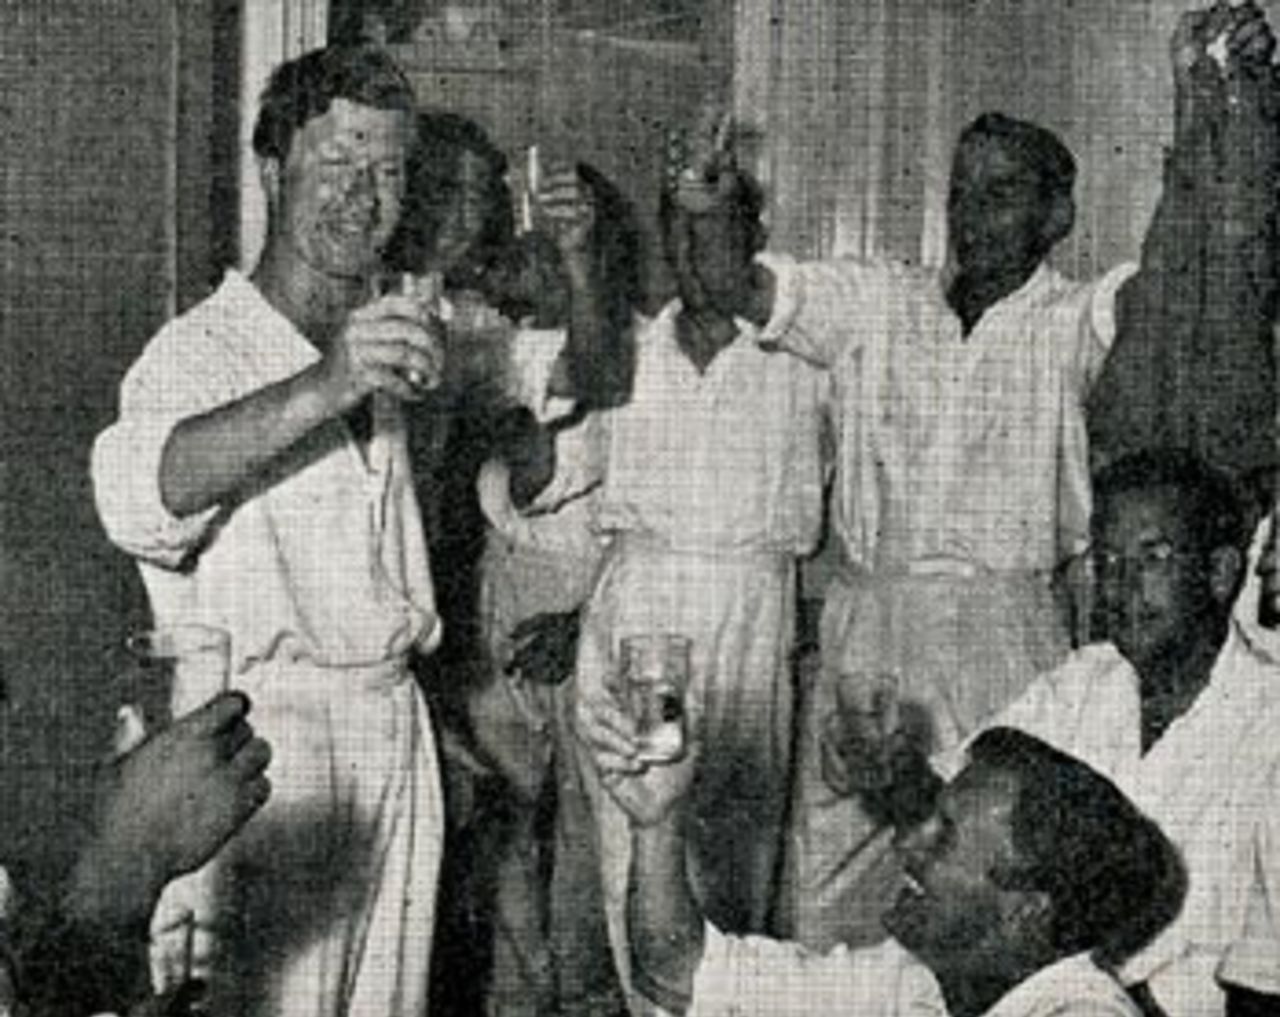 Colin Ingleby-Mackenzie leads Hampshire celebrations after they secured their first Championship title, 1961